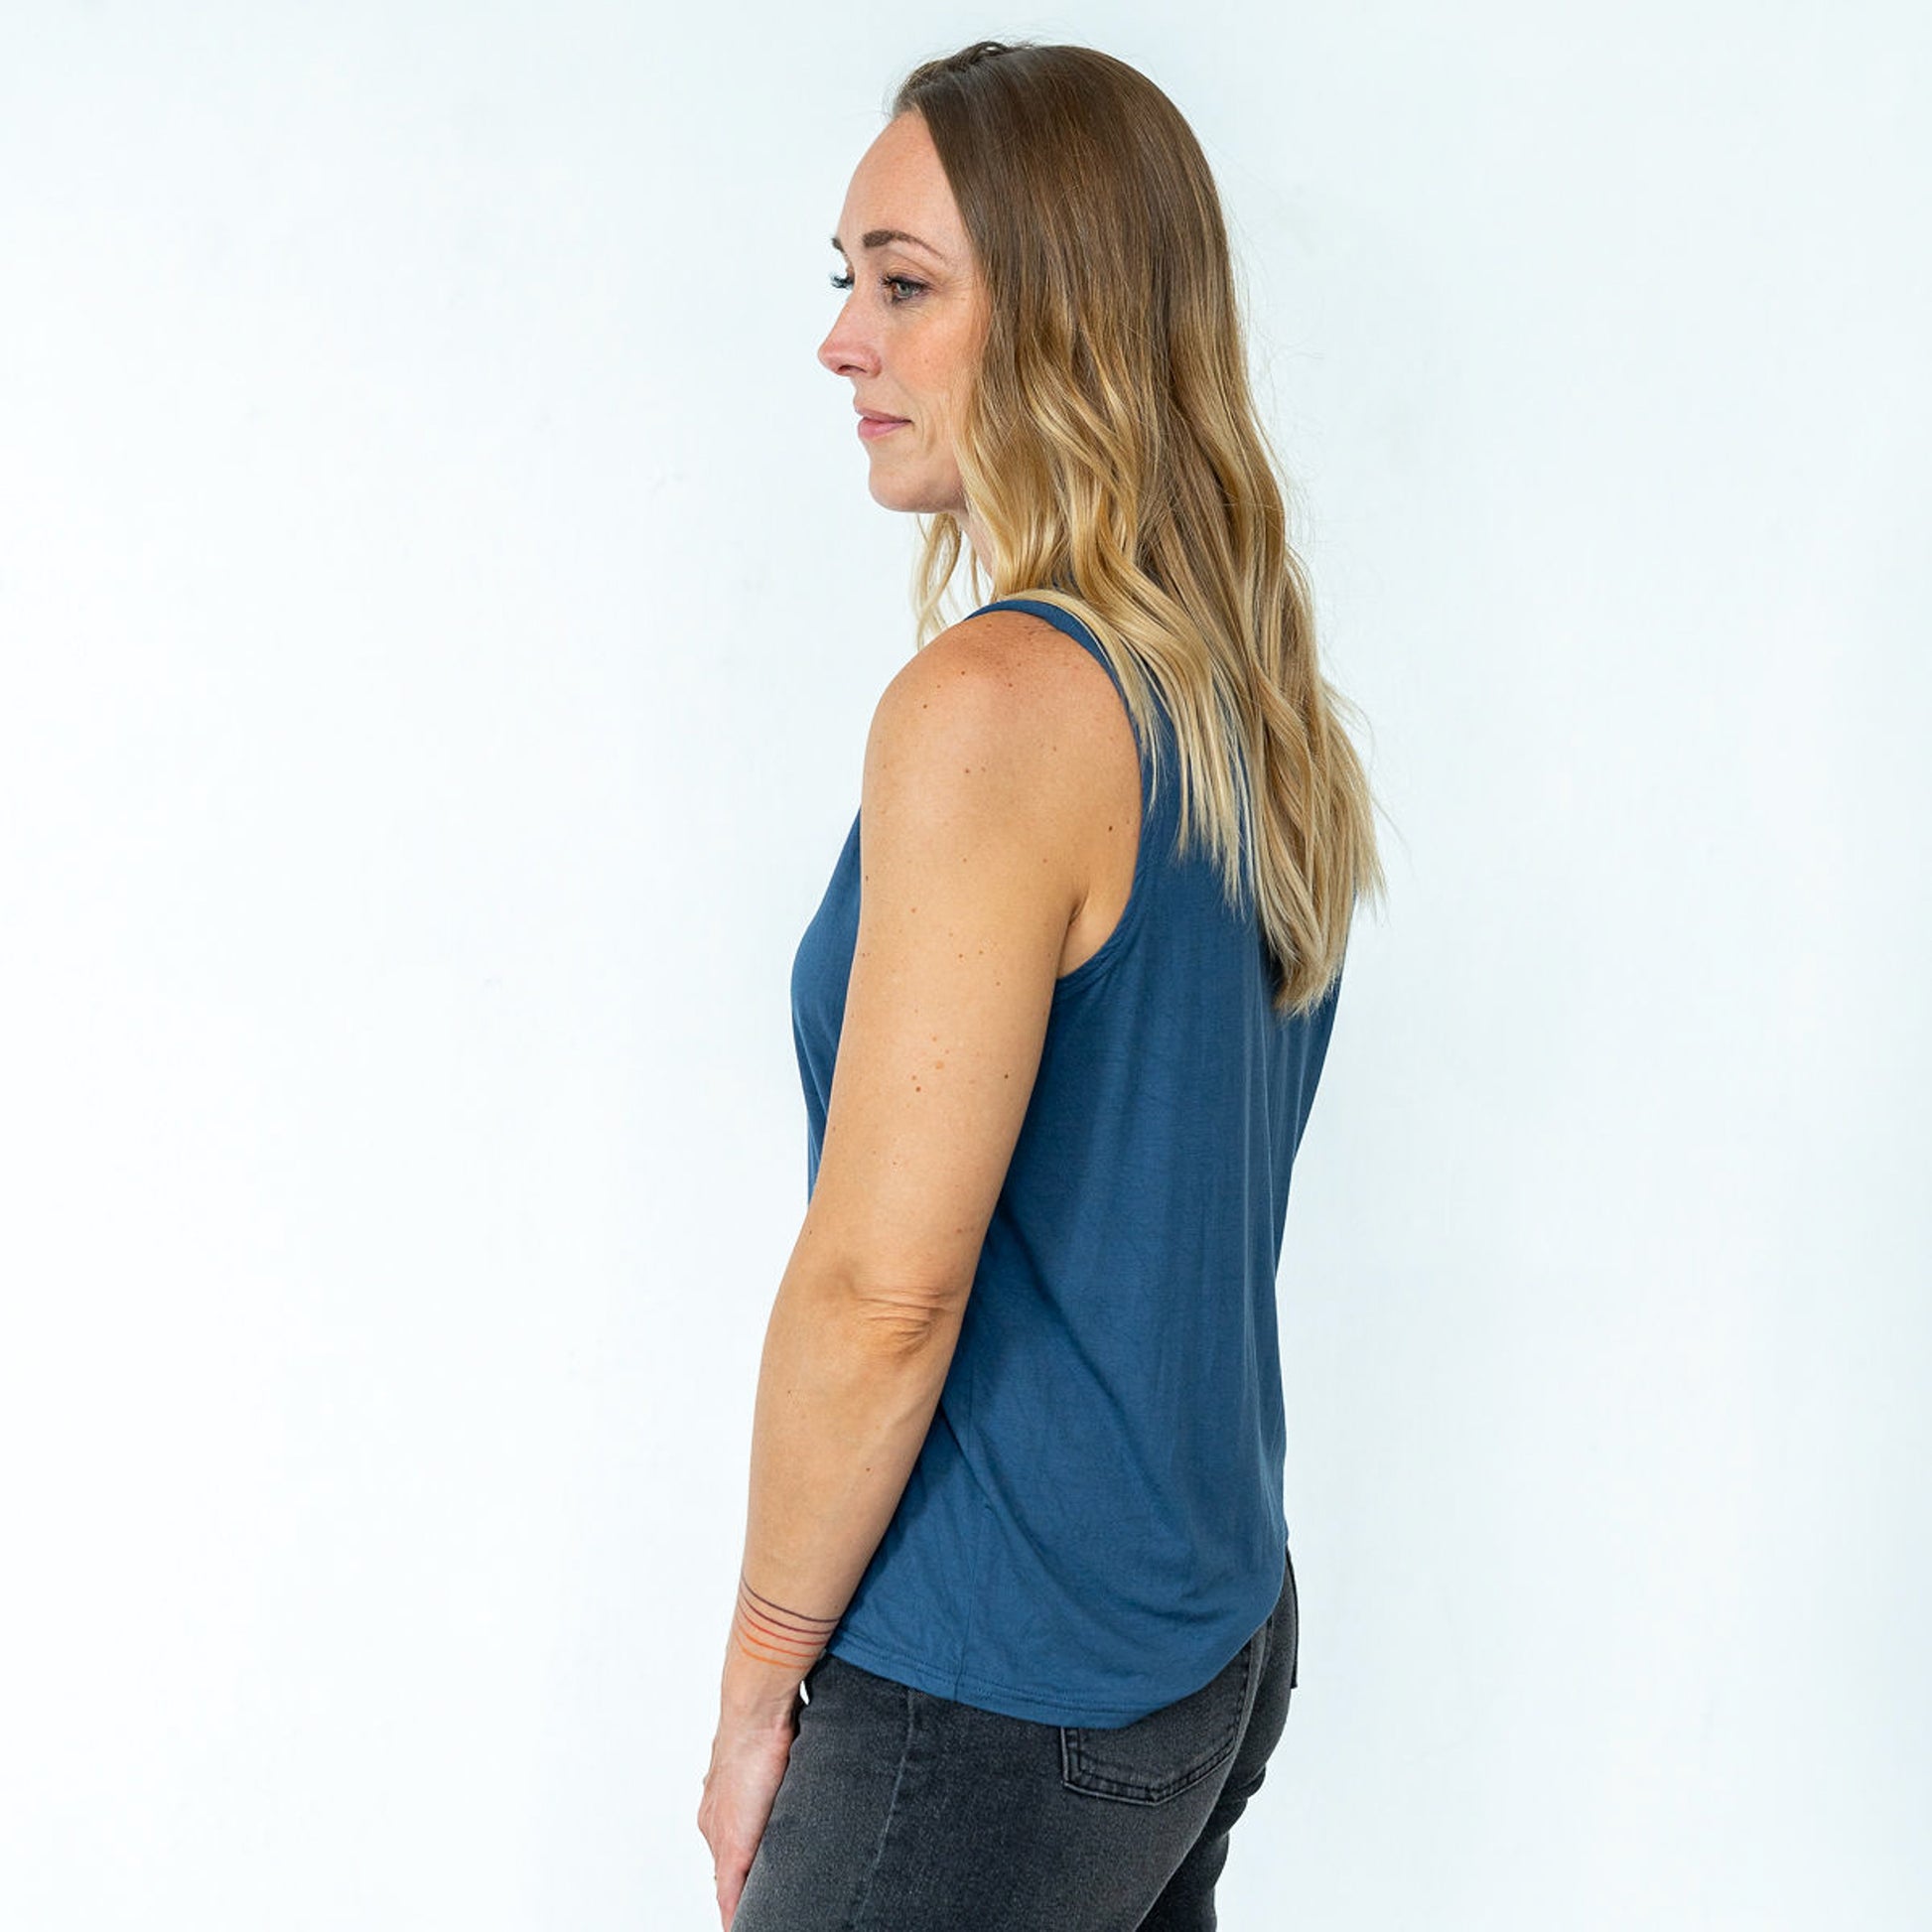 ethical fairtrade fair-trade tank tanktop top cami button buttonup button-up vneck V-neck sleeveless anti-traffic anti-trafficking blue steel blue steel-blue